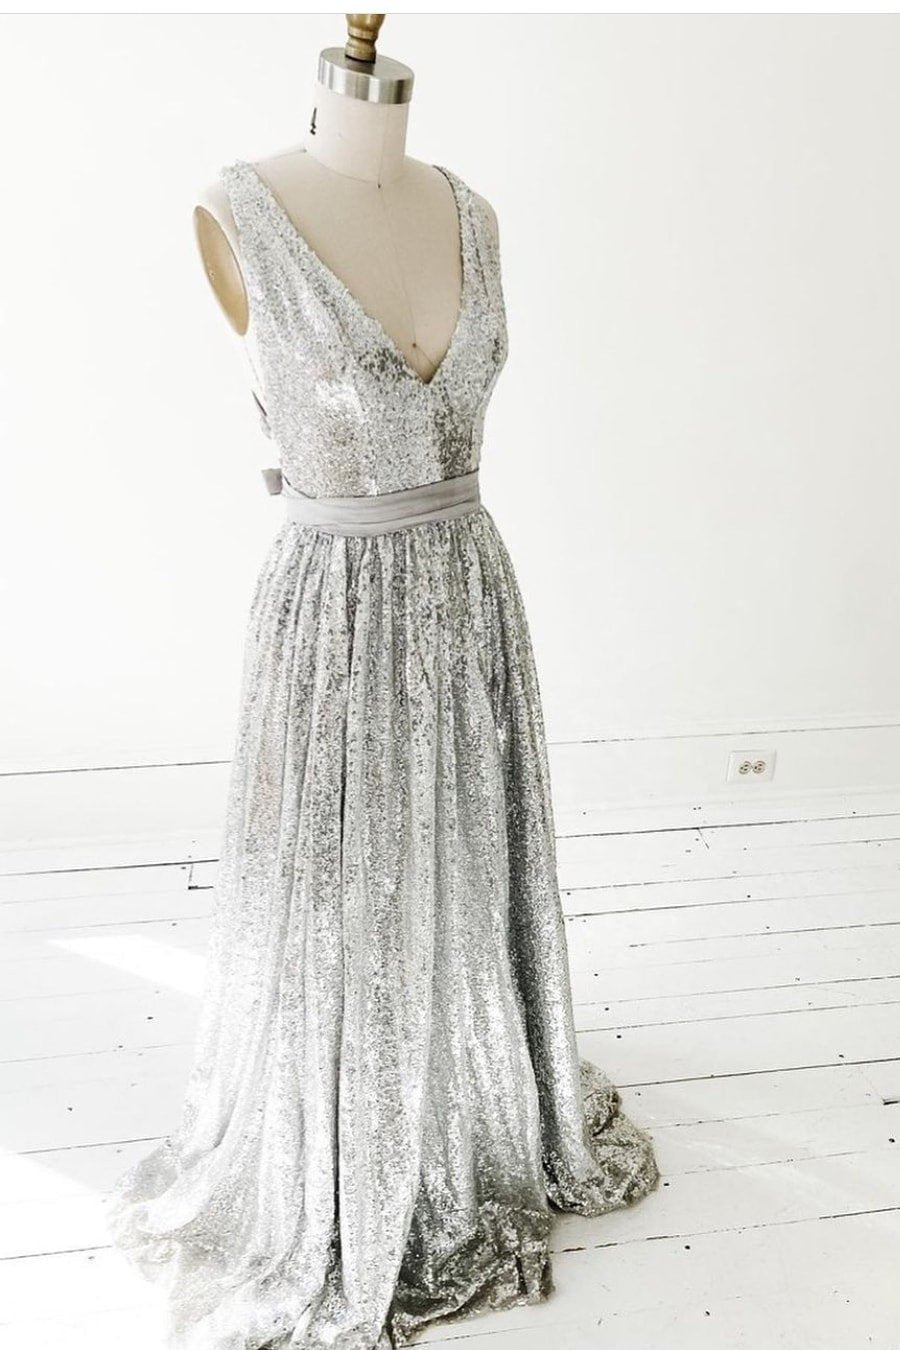 Sparkly A-line Silver Sequin Corset Prom Dresses with V-neckline outfit, Bridesmaid Dress Colors